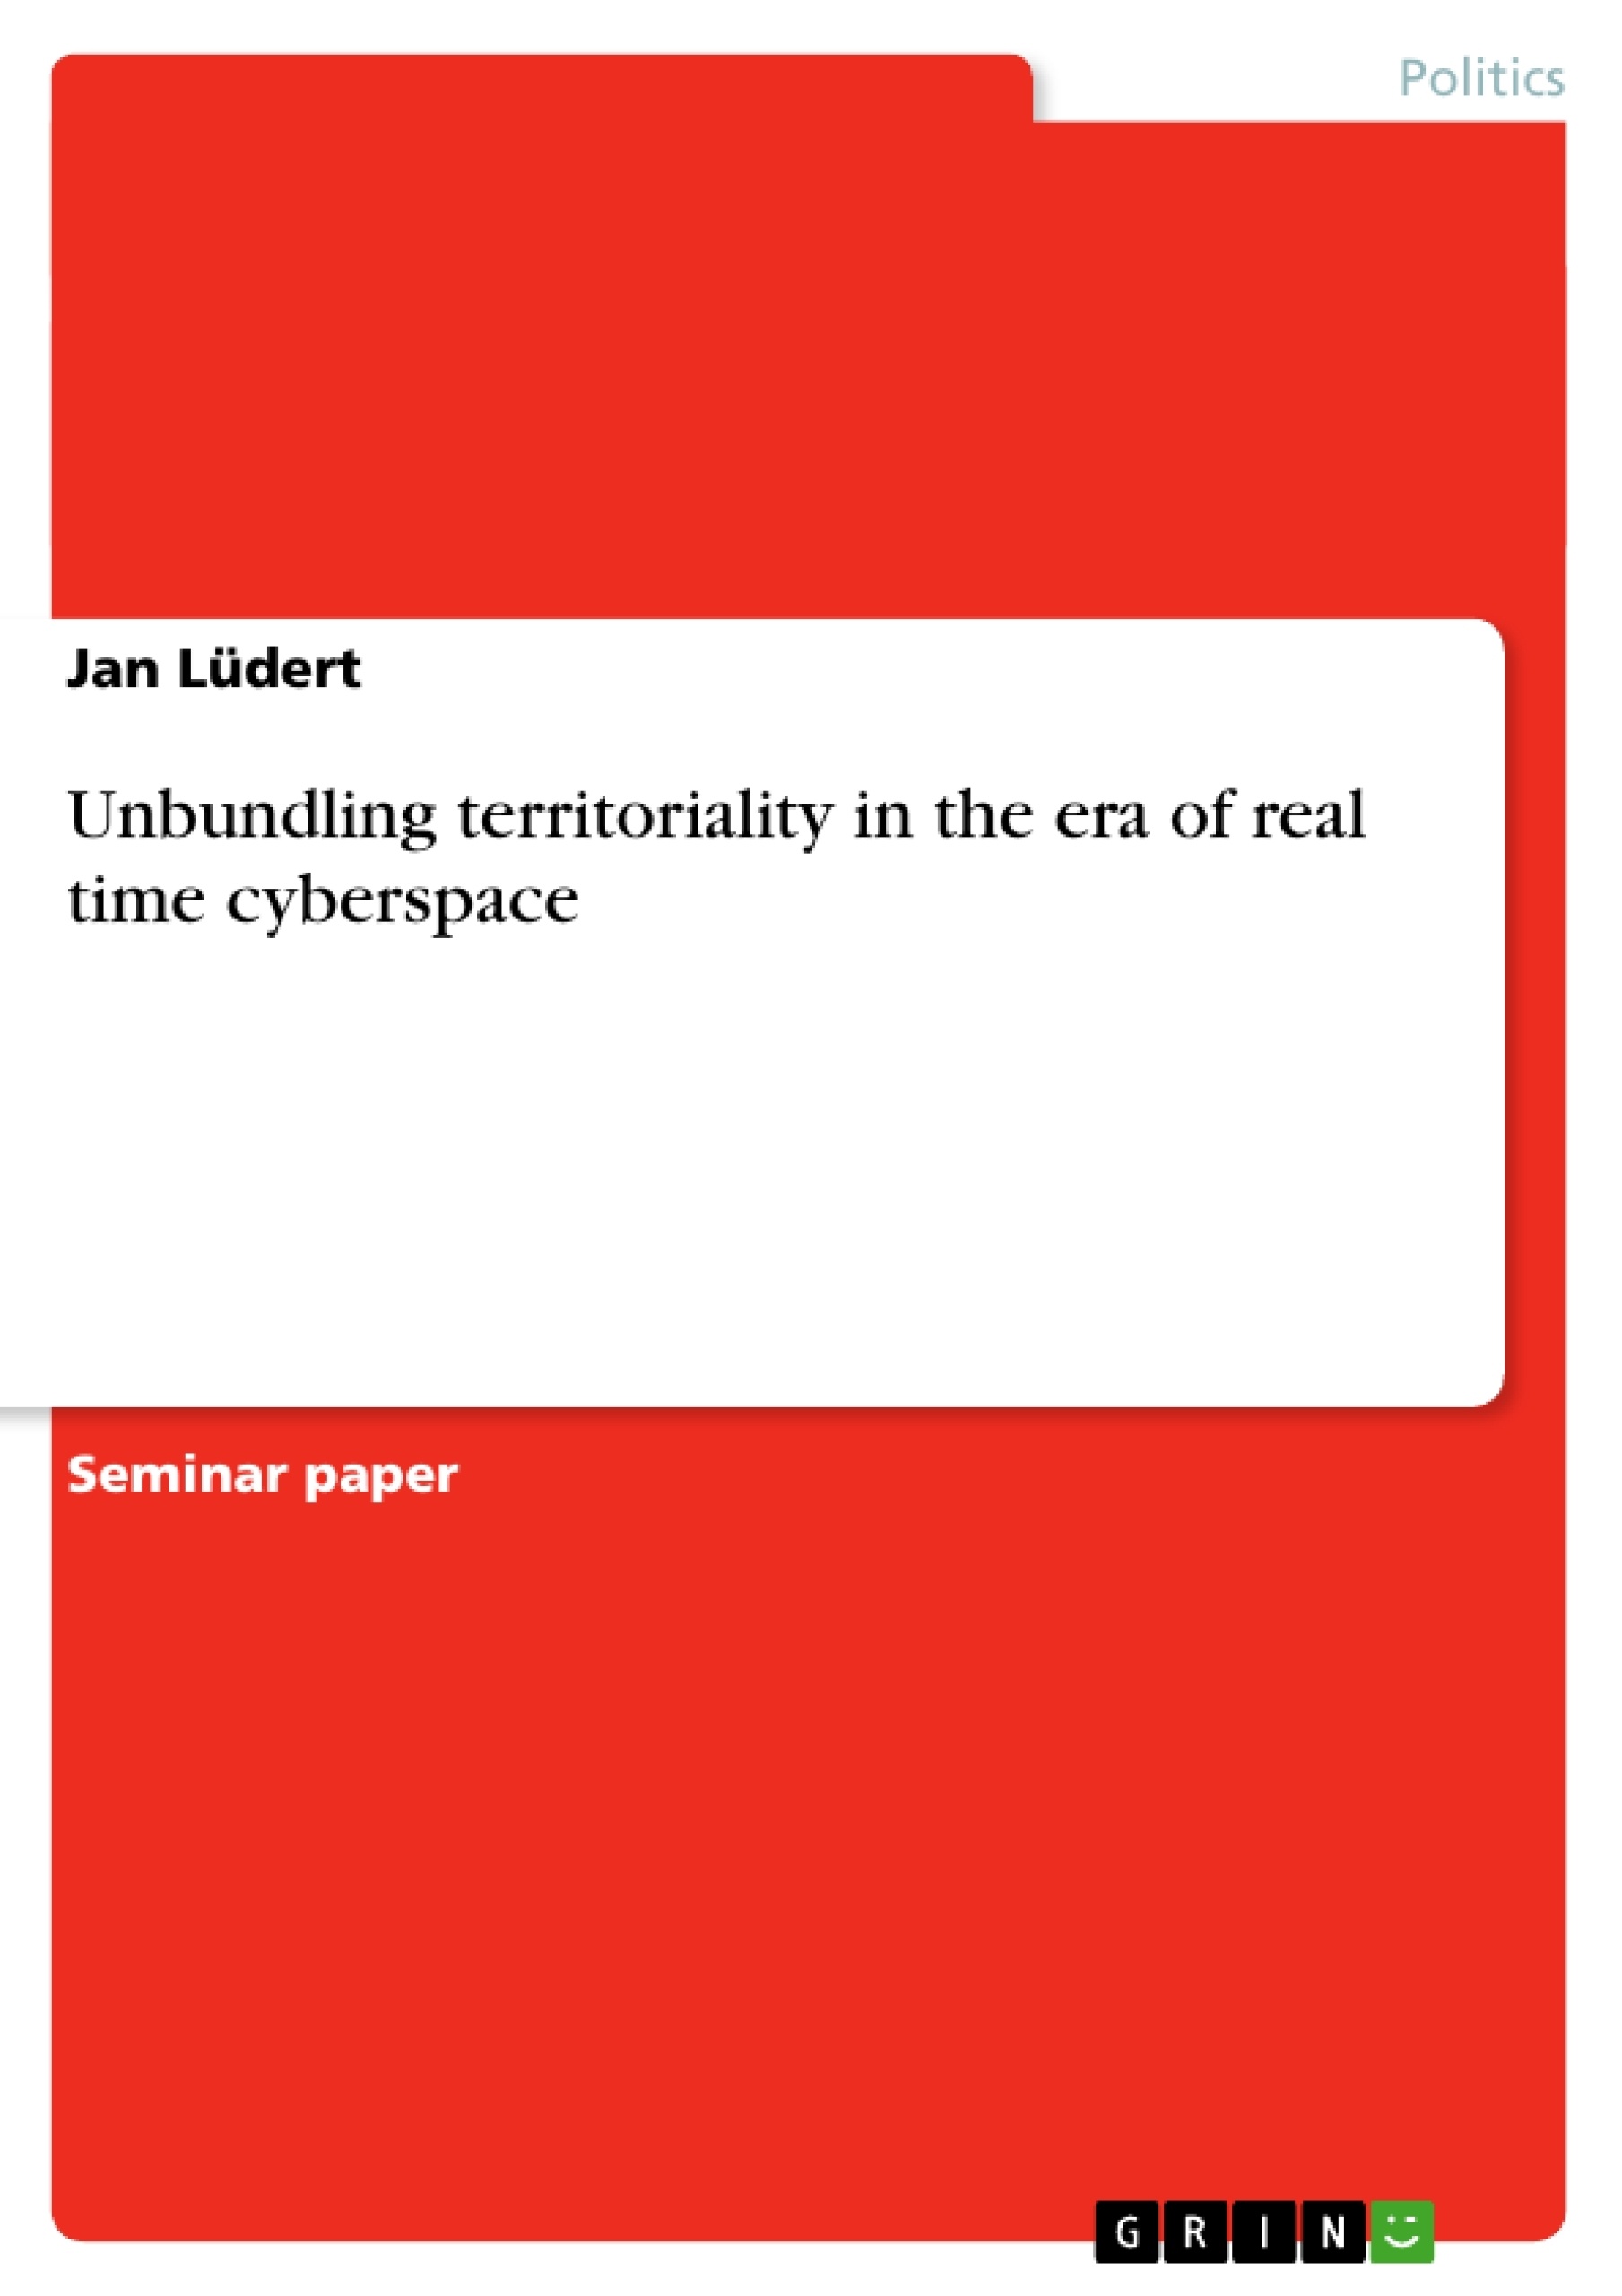 Titre: Unbundling territoriality in the era of real time cyberspace